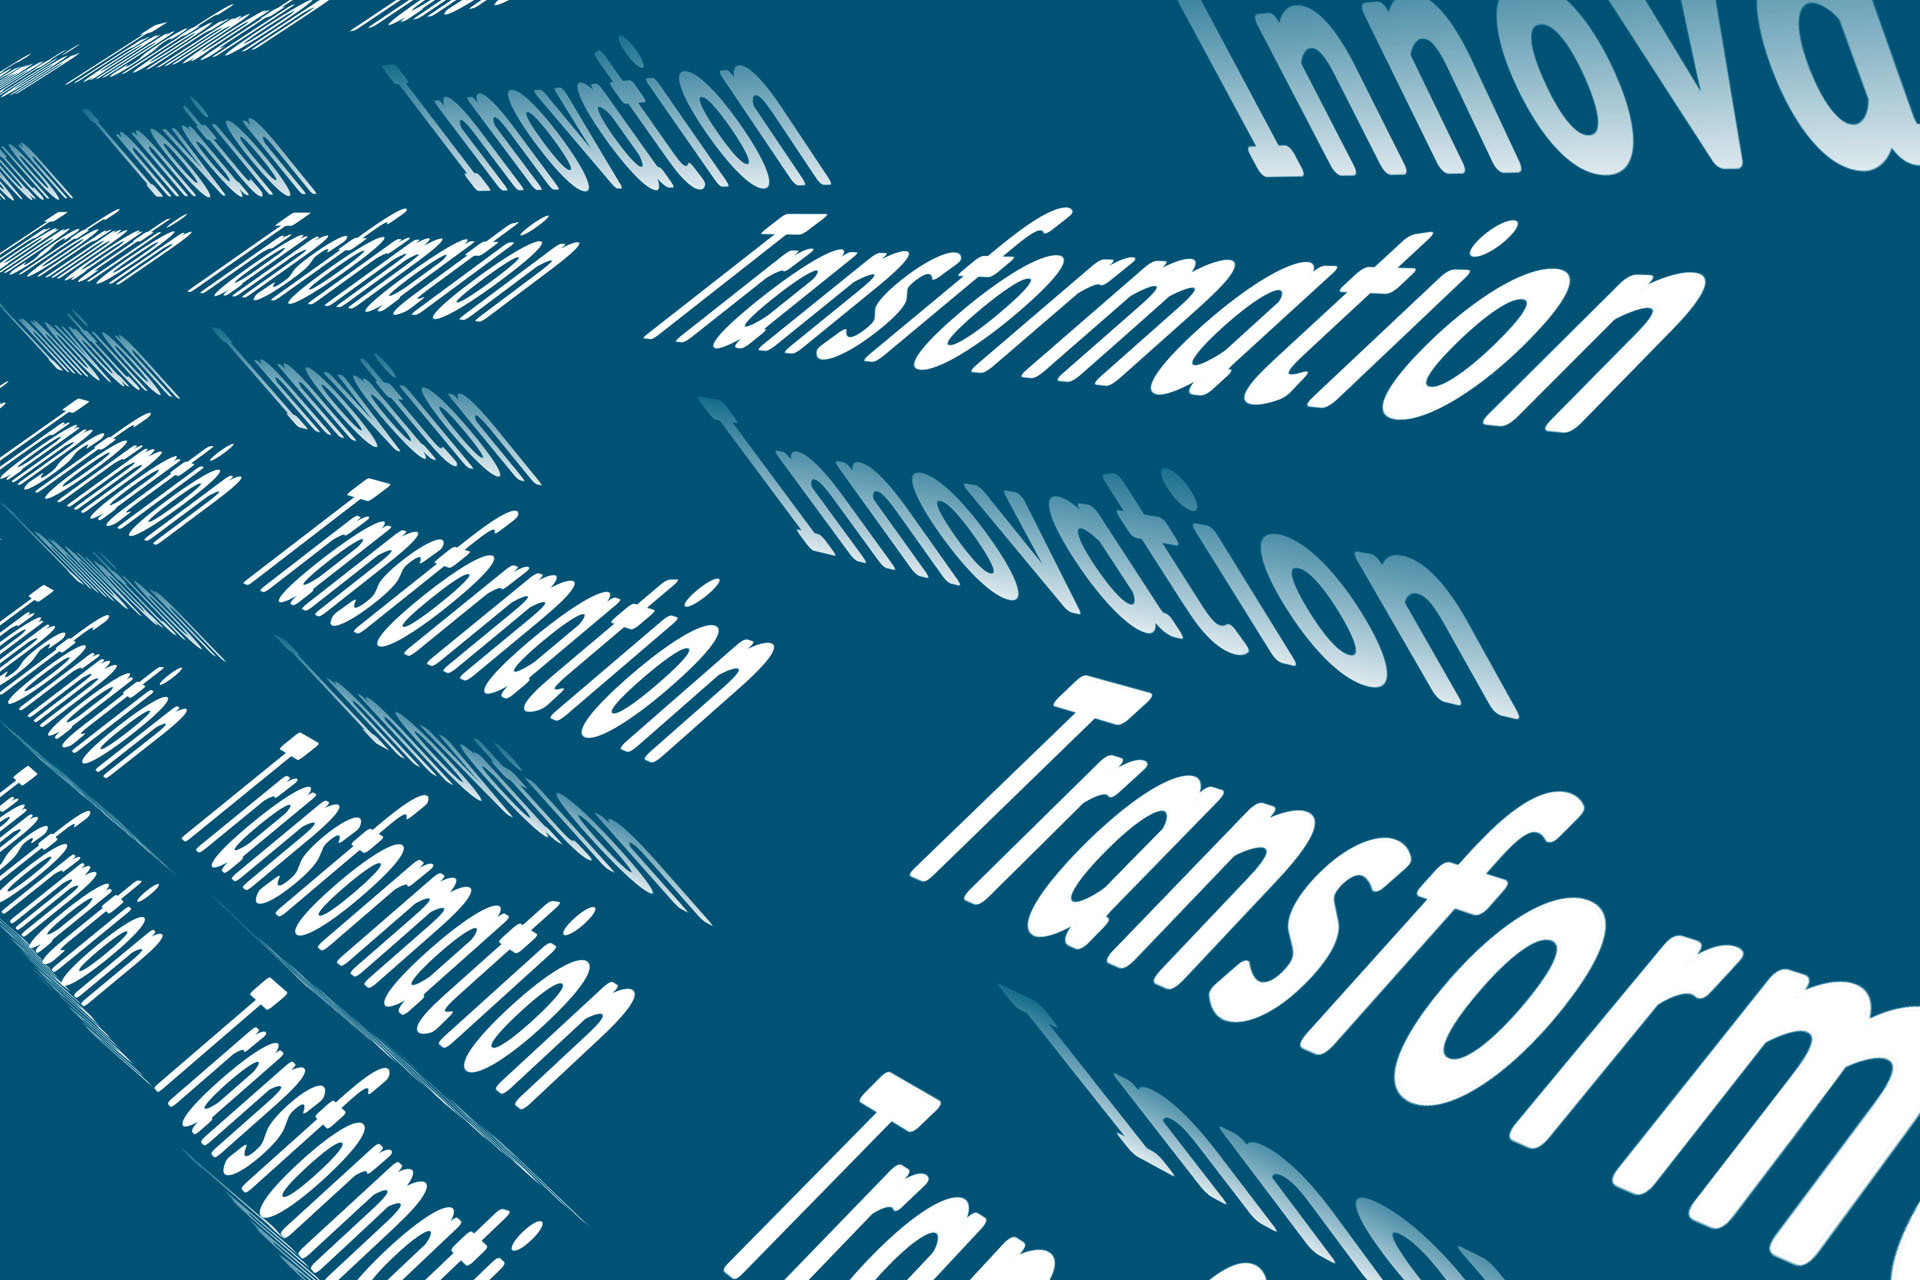 Graphic with words 'innovation' and 'transformation'